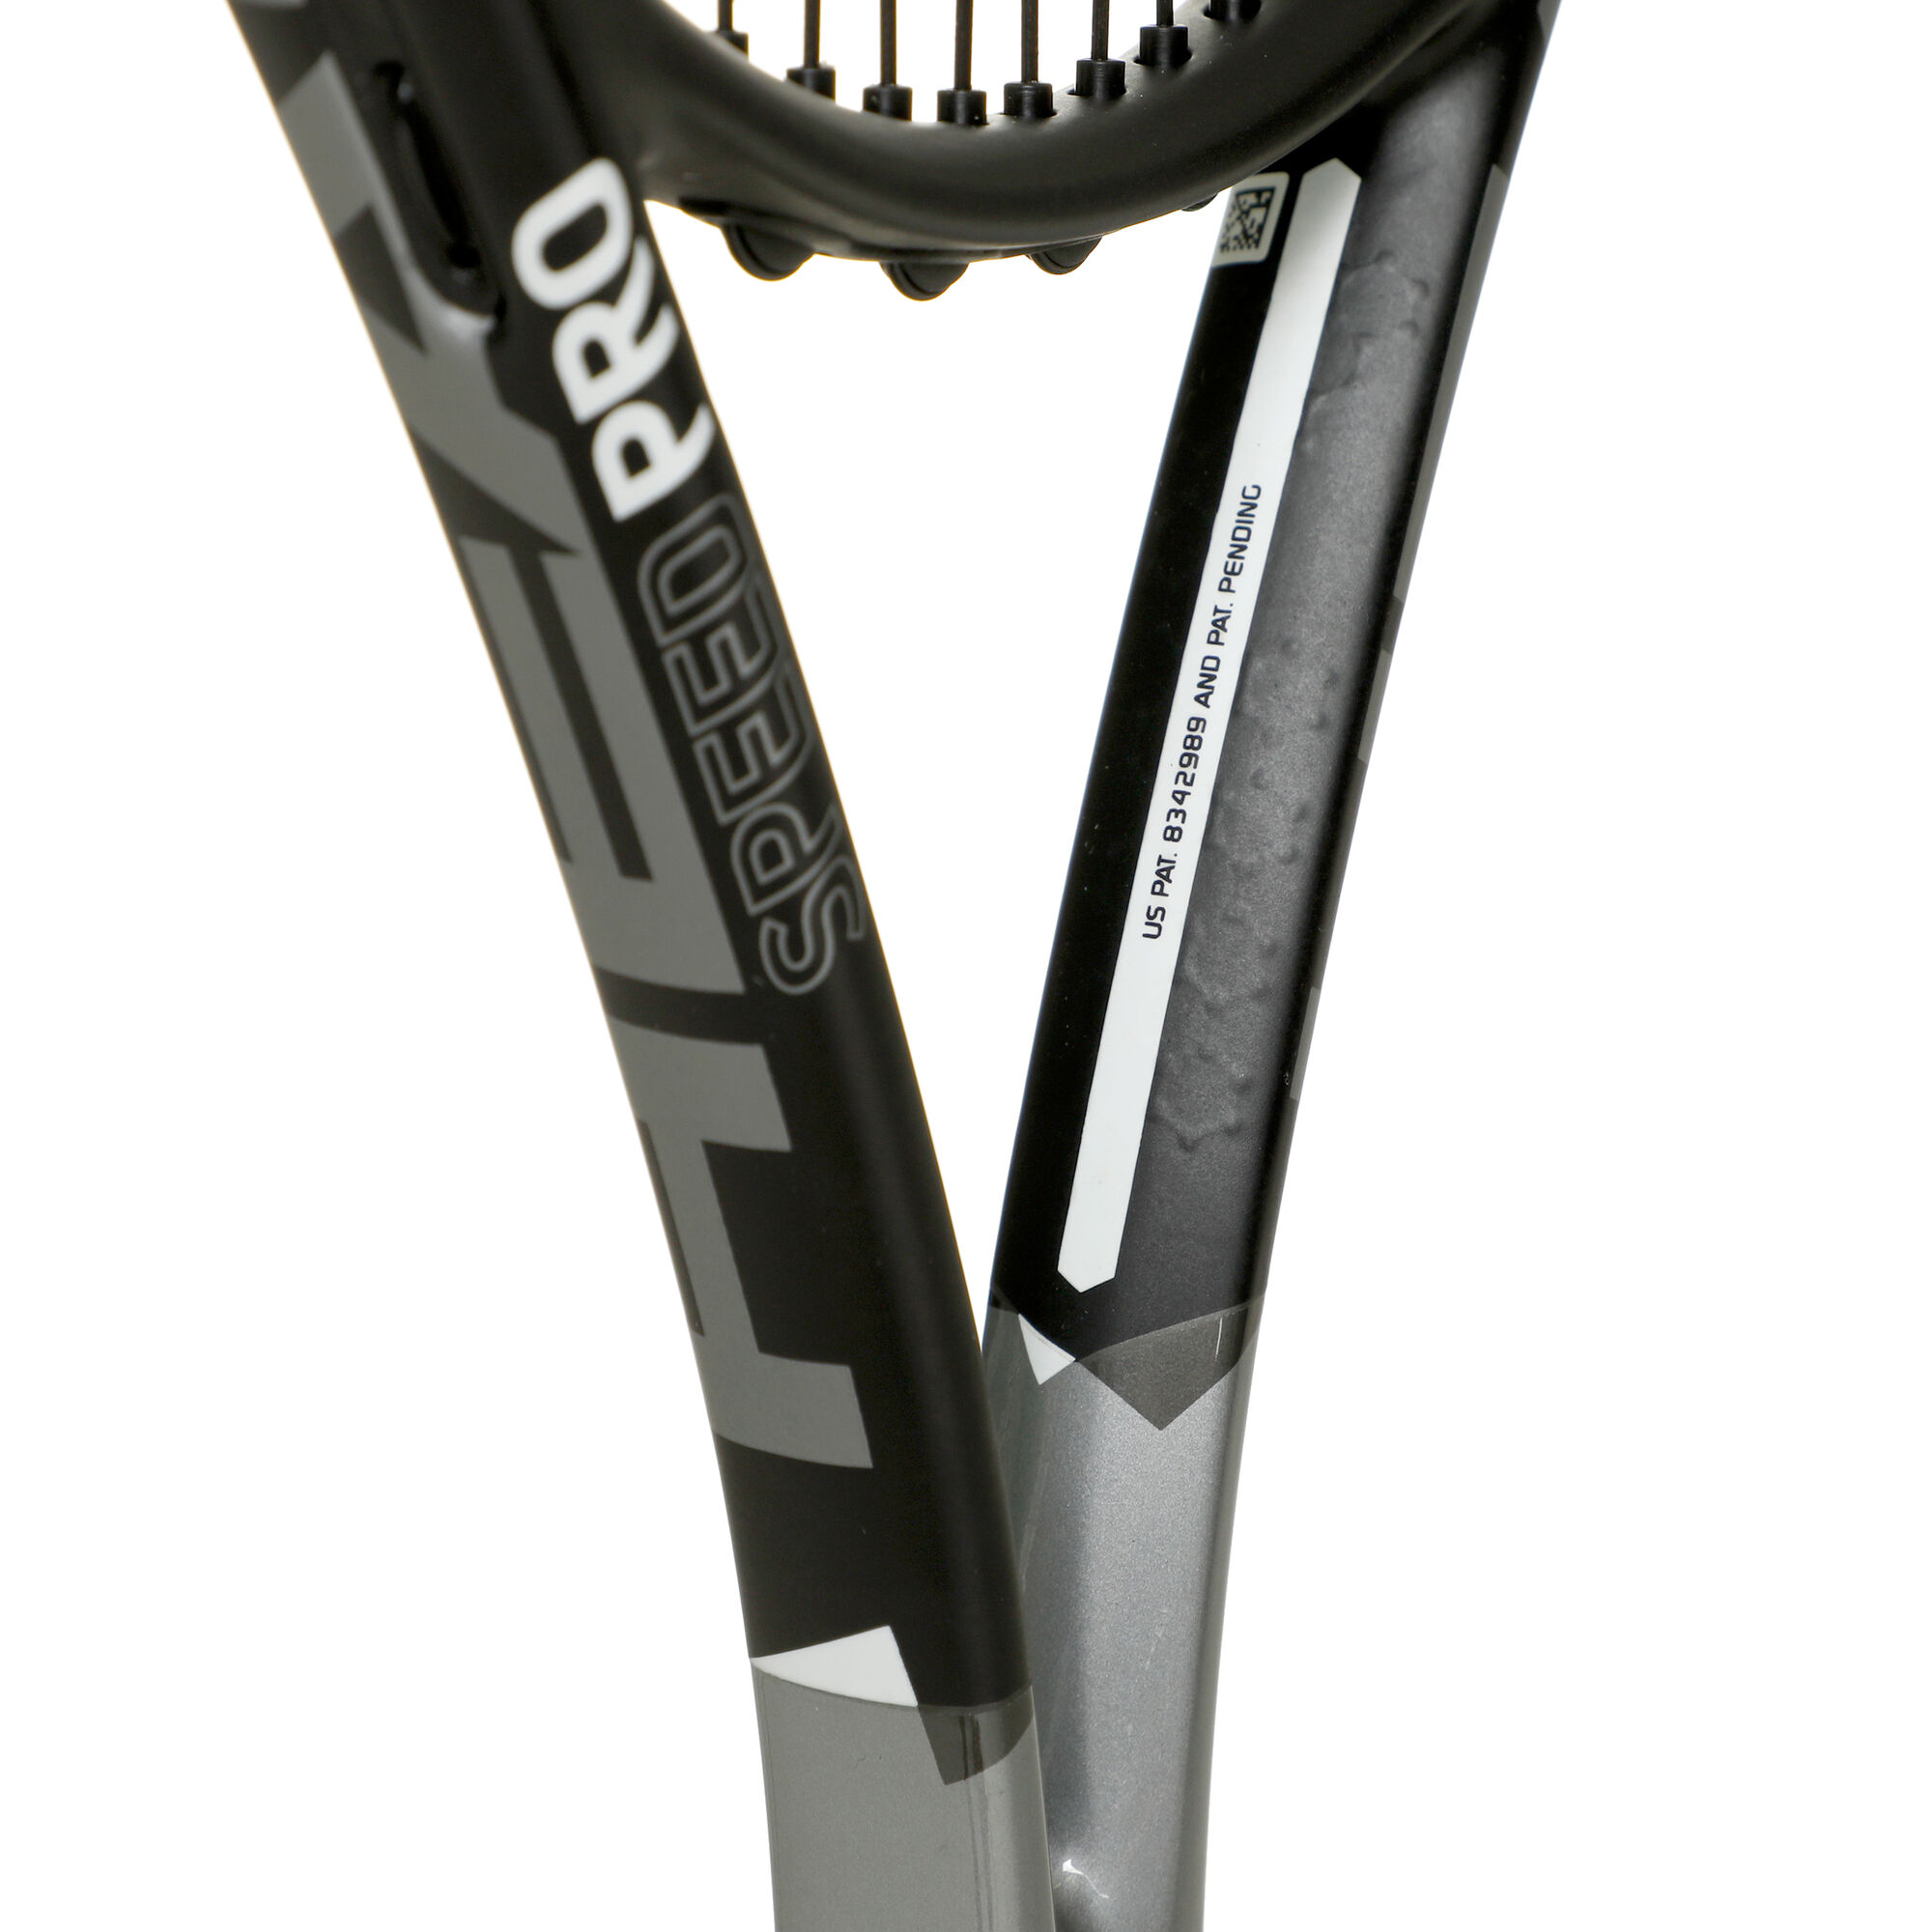 Buy HEAD Speed Pro 2022 (strung, Special Edition) online | Tennis Point COM